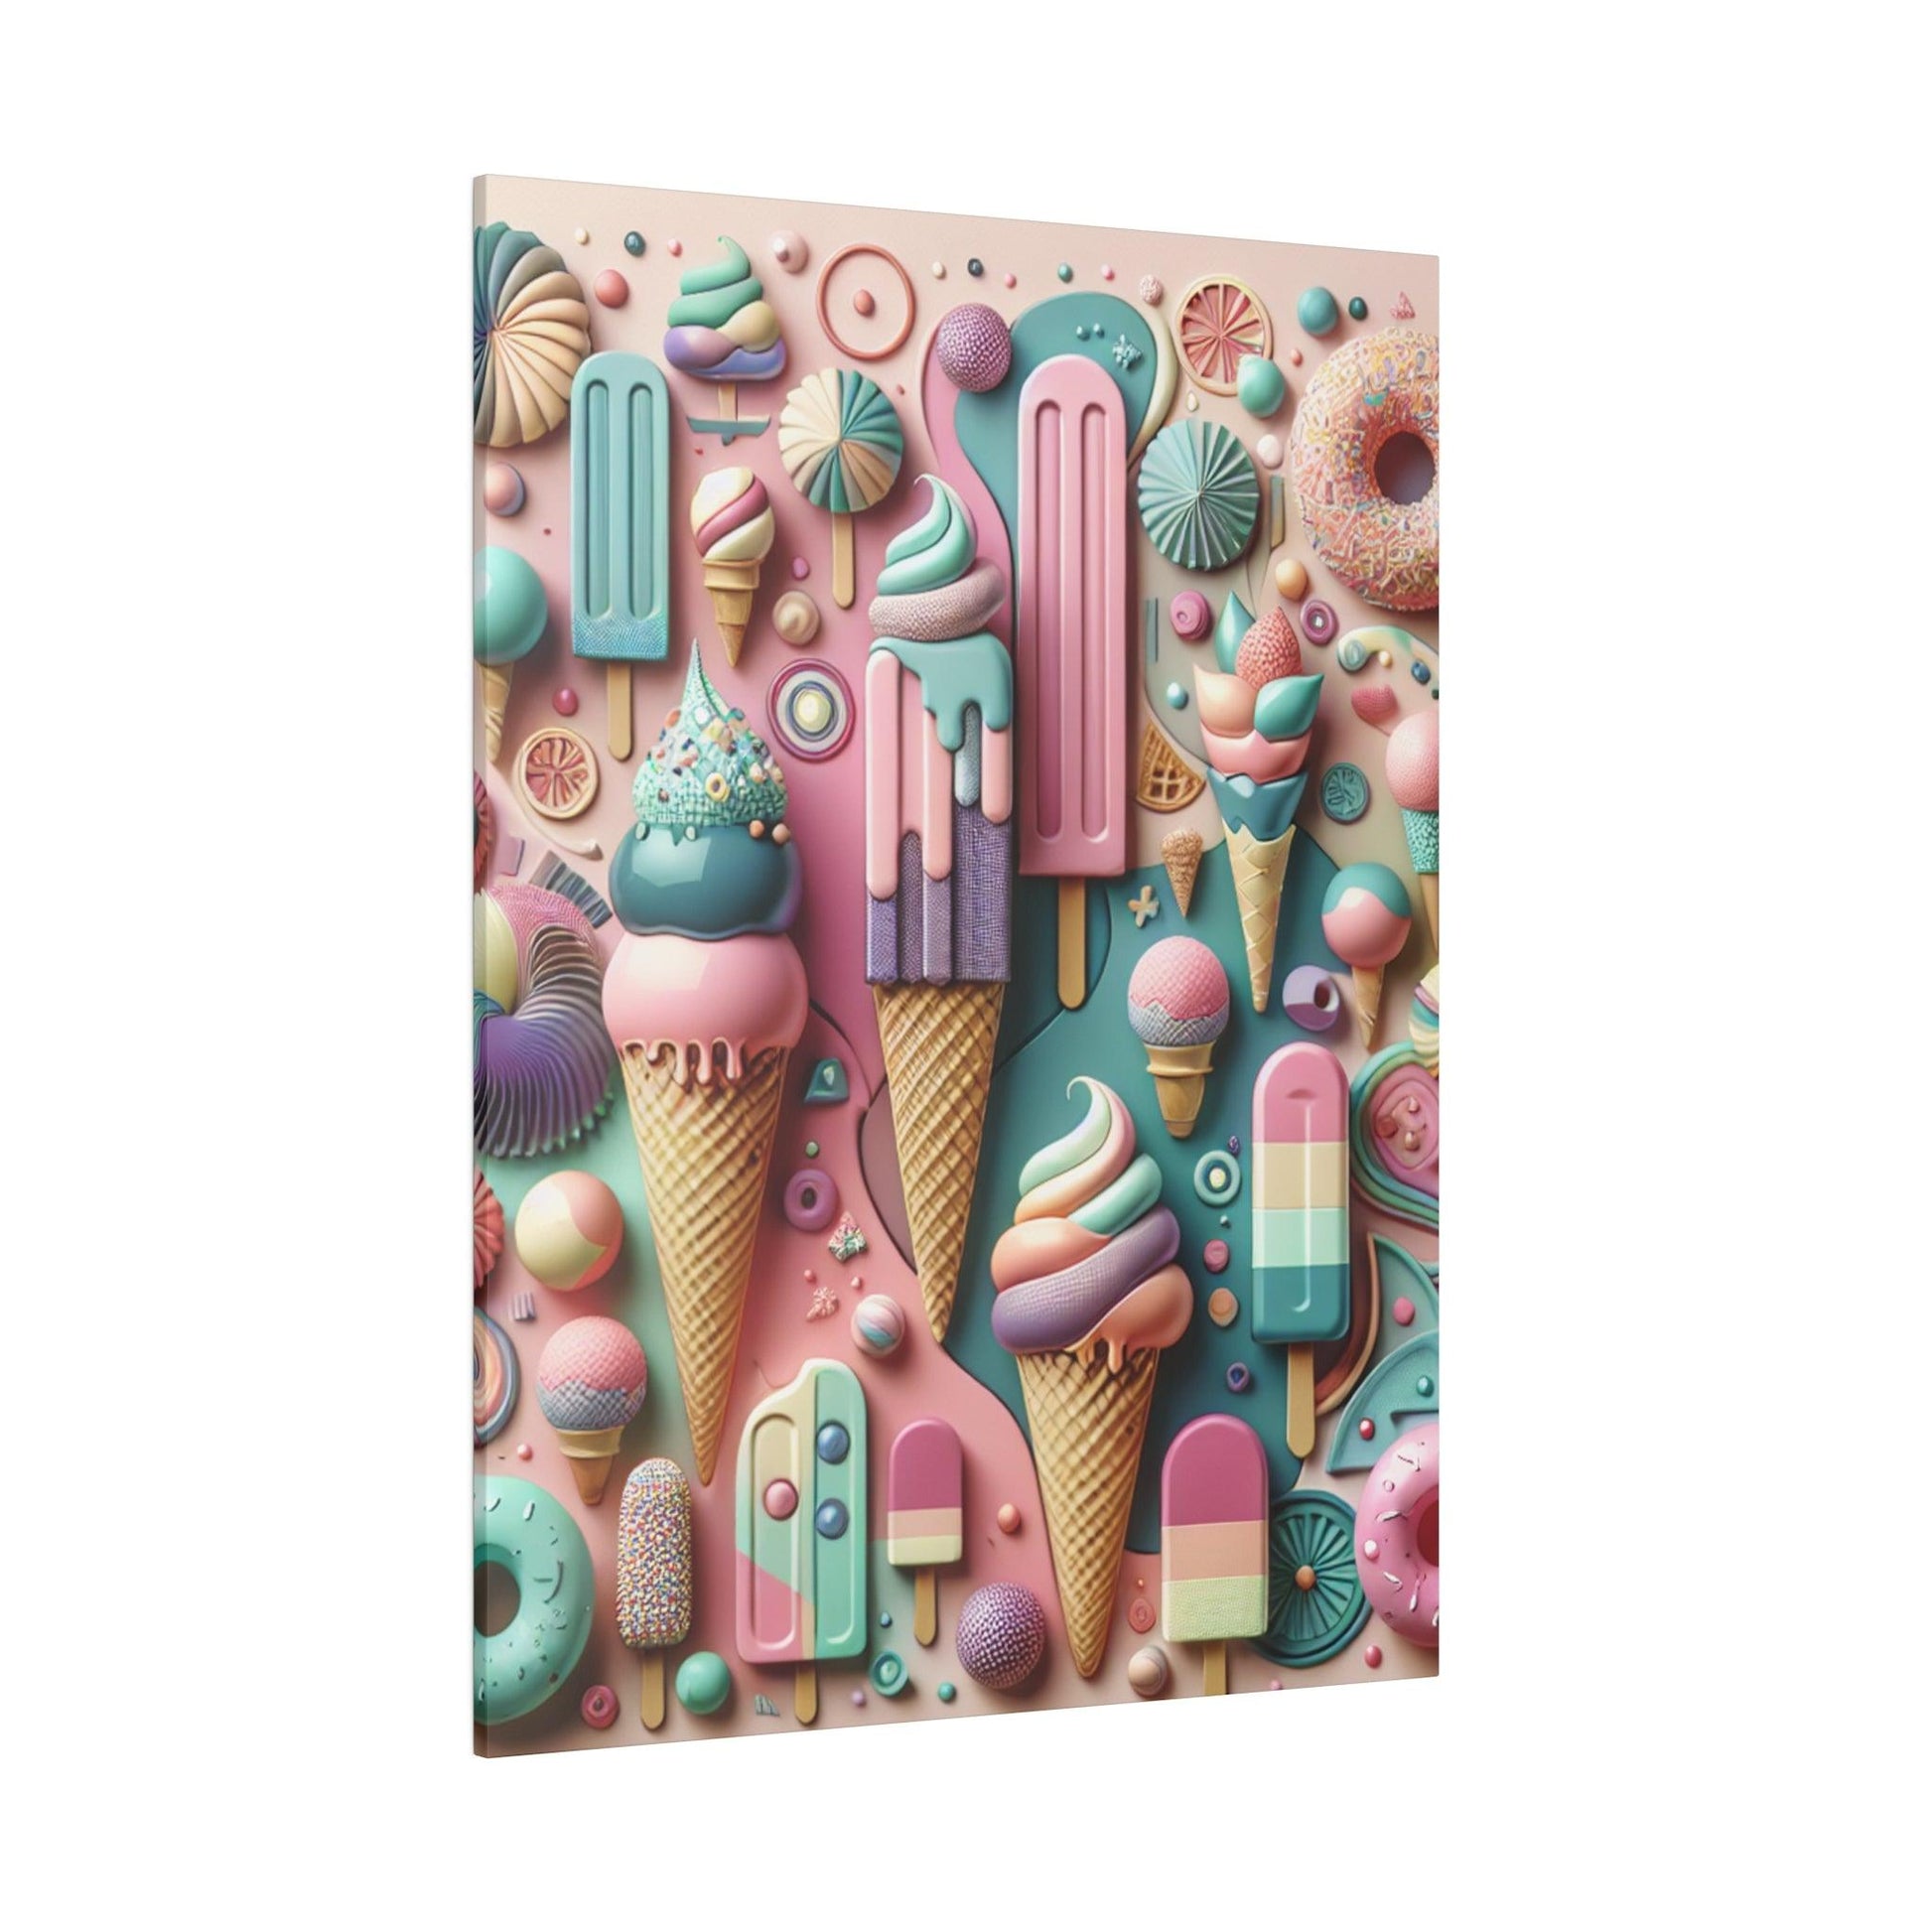 "Scoops of Serenity: Ice Cream Inspired Canvas Wall Art" - The Alice Gallery